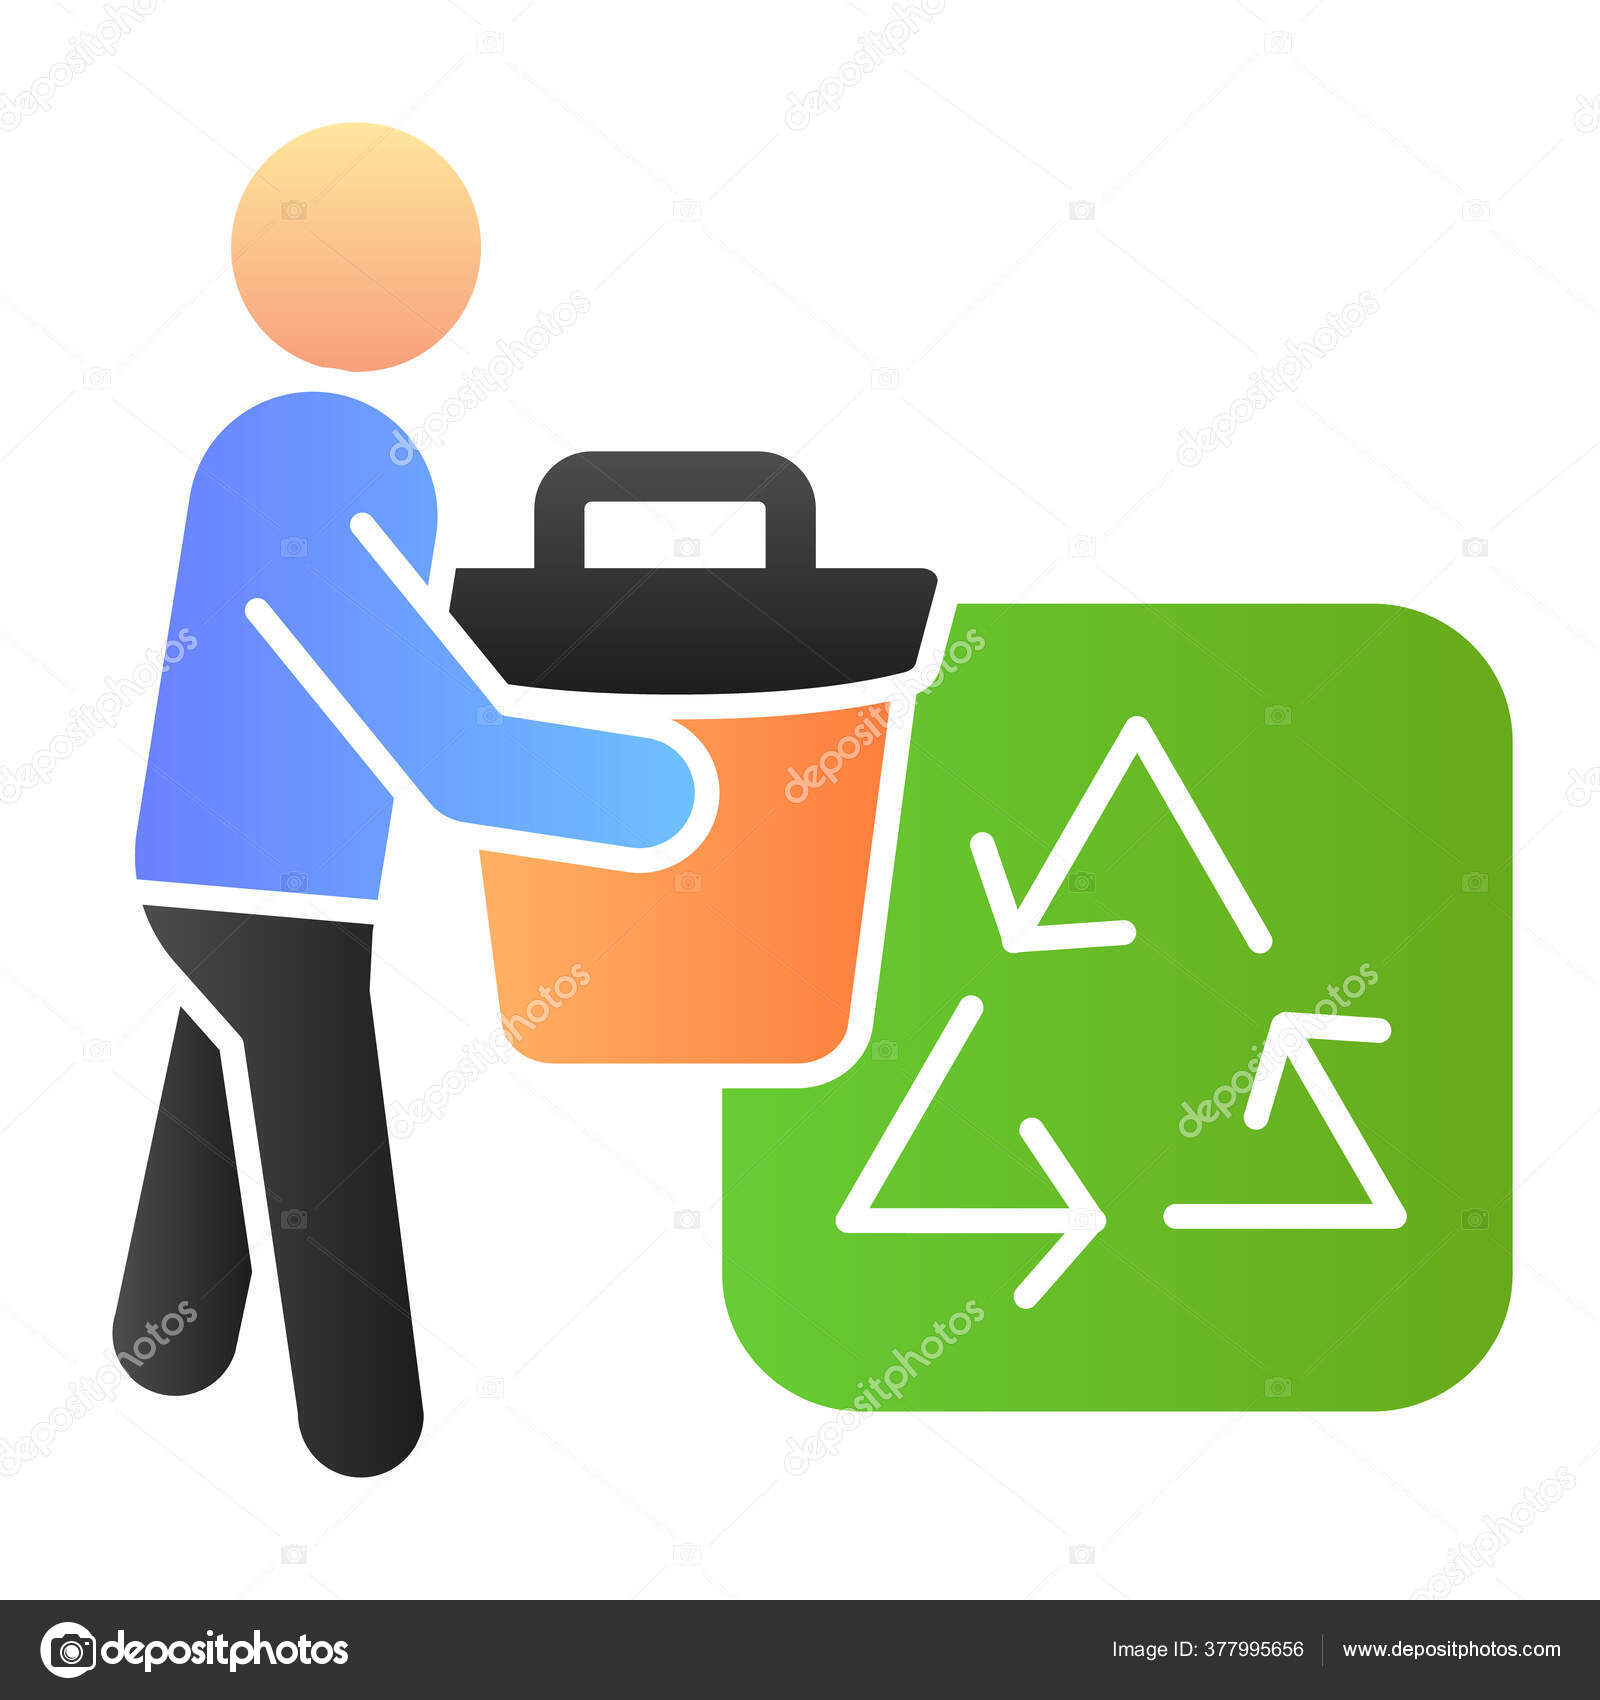 Trash Bin And Recycle Sign Flat Icon Environment Color Icons In Trendy Flat Style Garbage Recycling Gradient Style Design Designed For Web And App Eps 10 Vector Image By C Sabustock